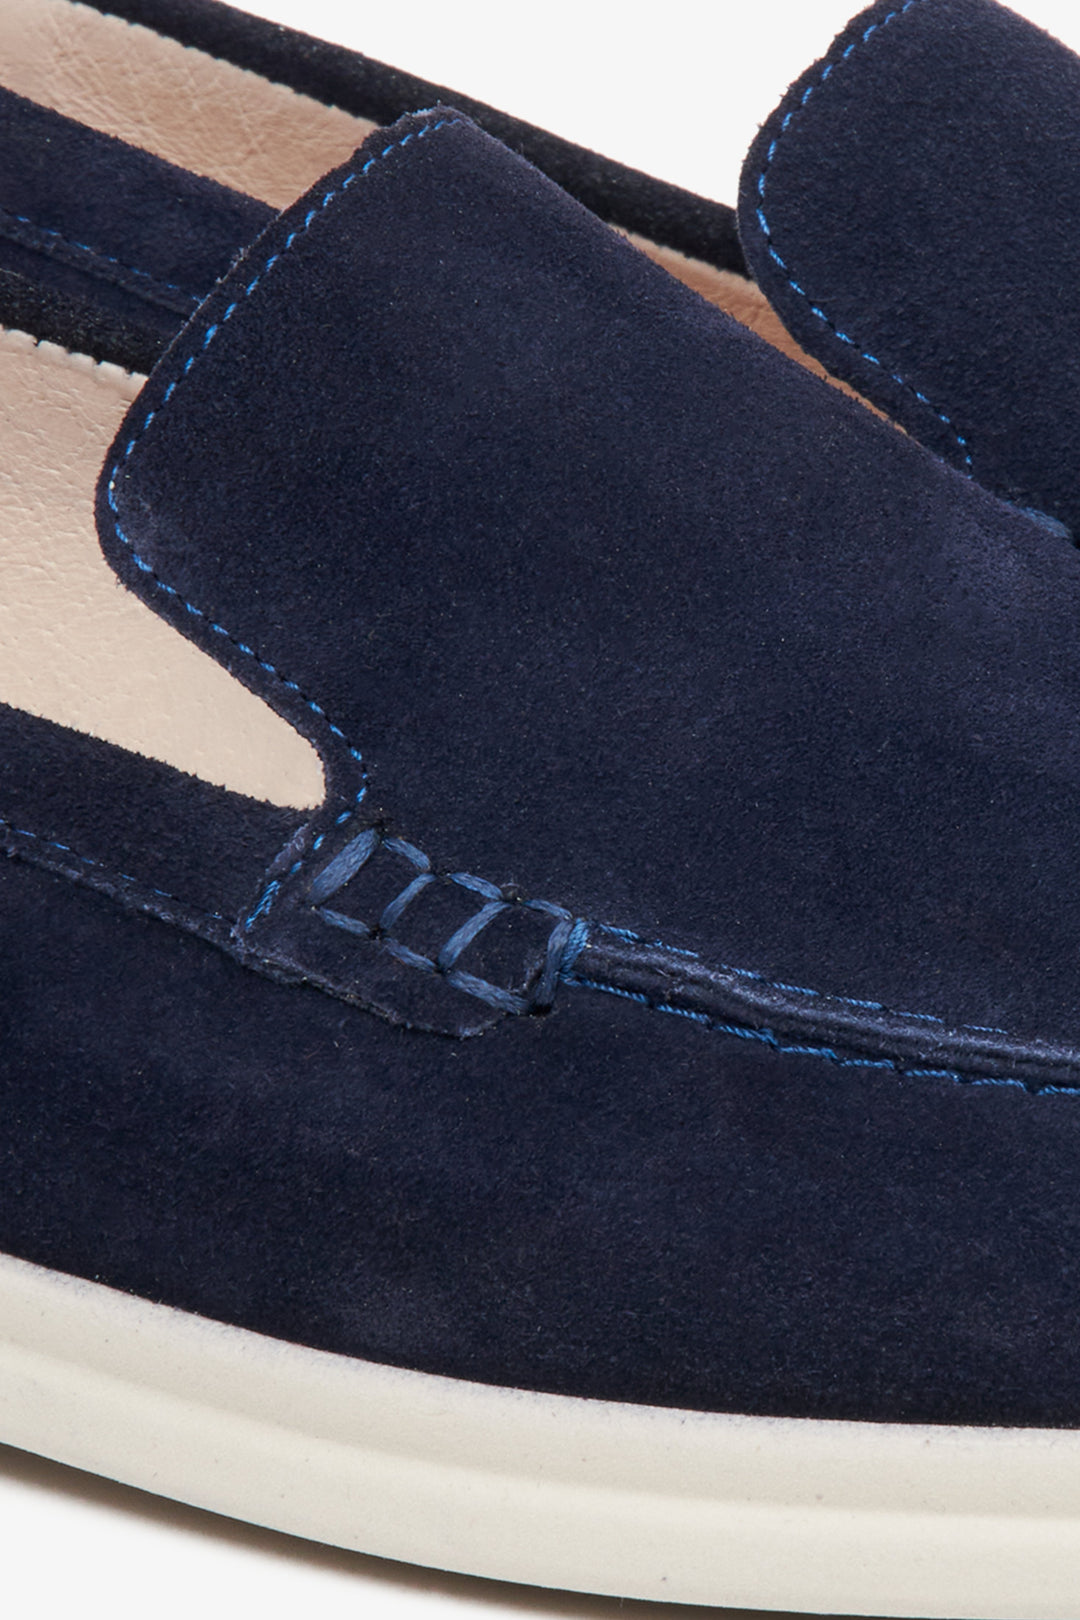 Men's navy blue velvet moccasins - close-up of the stitching system and finishing touches of the model.